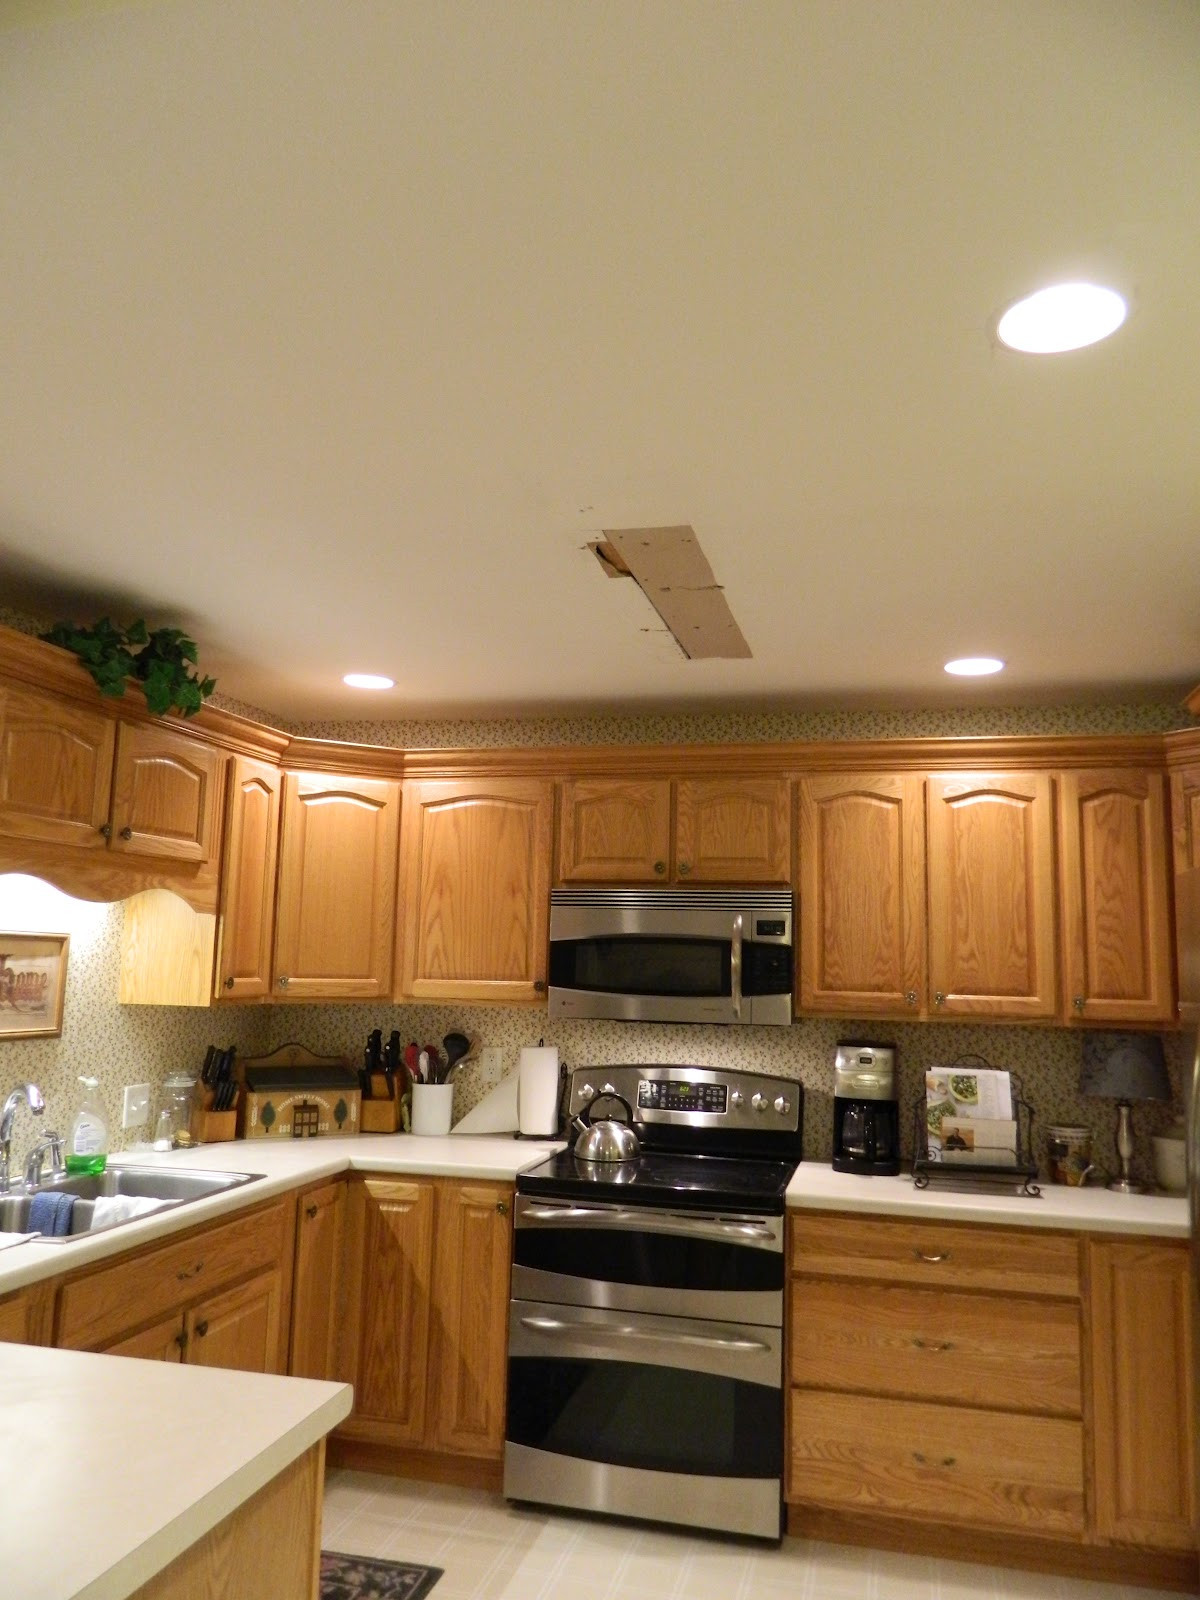 Kitchen Lights Ceiling
 Kitchen Ceiling Lights Ideas to Enlighten Cooking Times